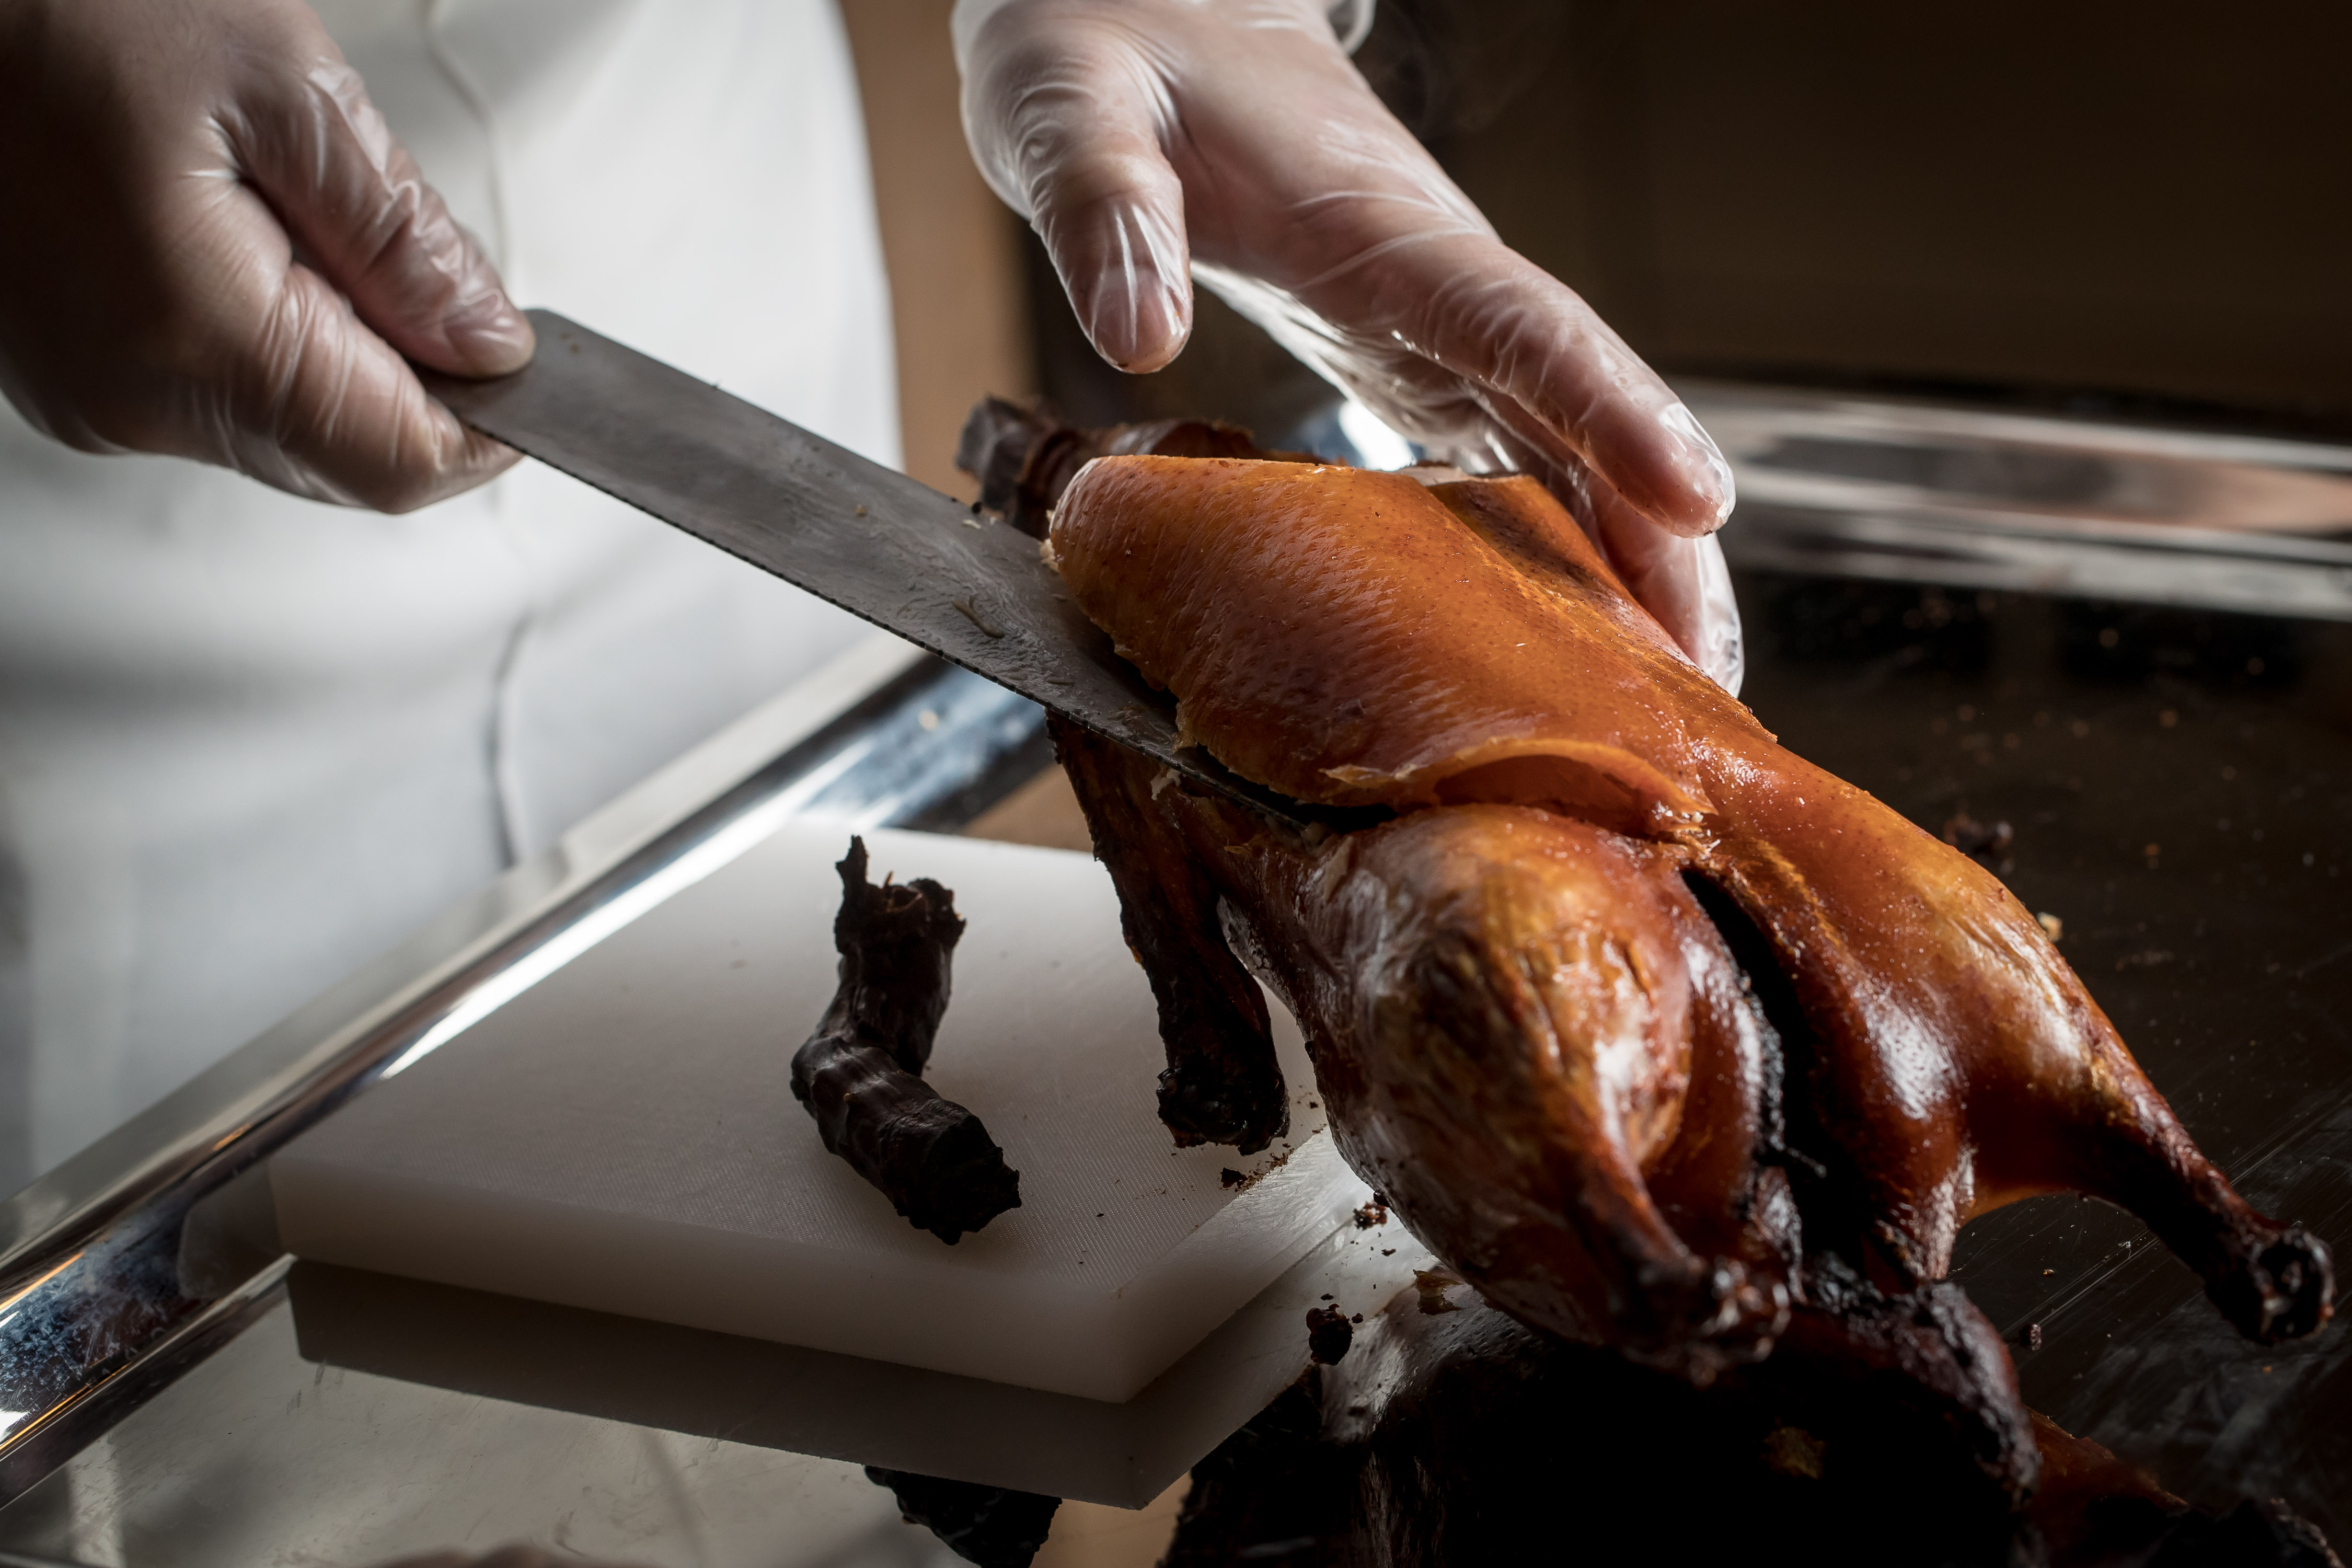 A chef’s gloved hands reaching towards a roast duck on a table. One hand holds a knife which is propping up the duck